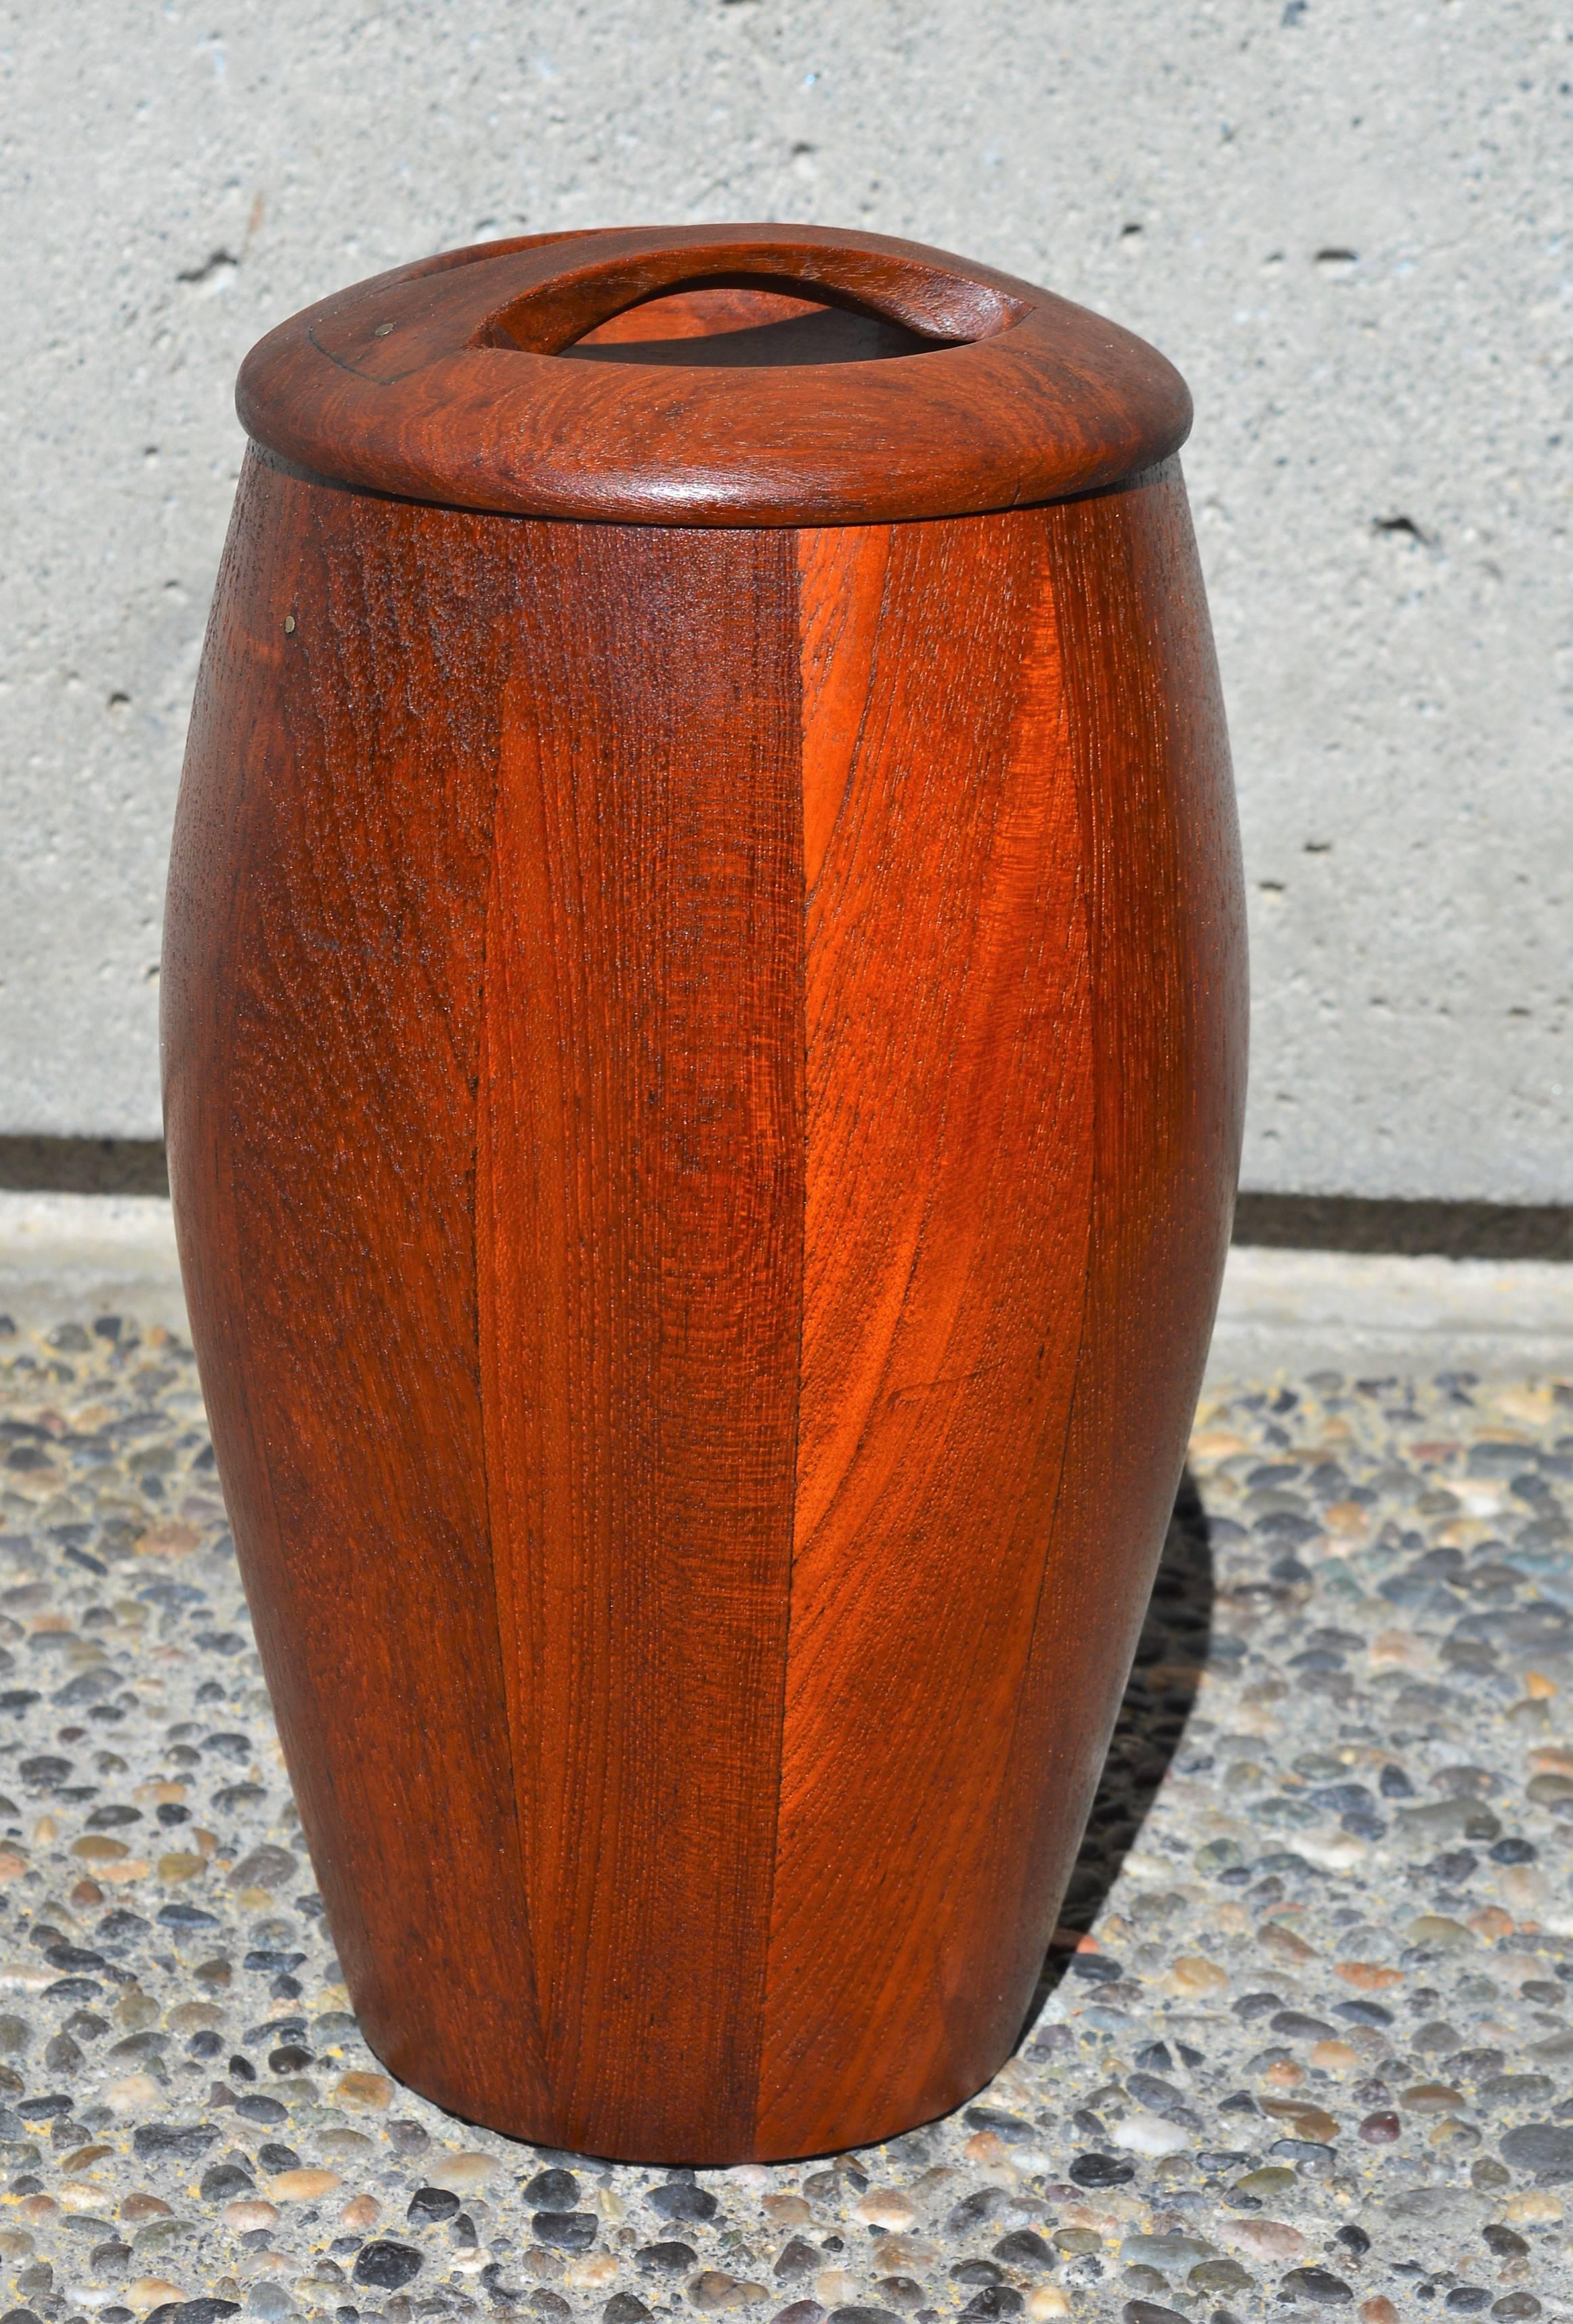 Jens Quistgaard Early 1950s Staved Teak Ice Bucket with Locking Lid In Excellent Condition For Sale In New Westminster, British Columbia